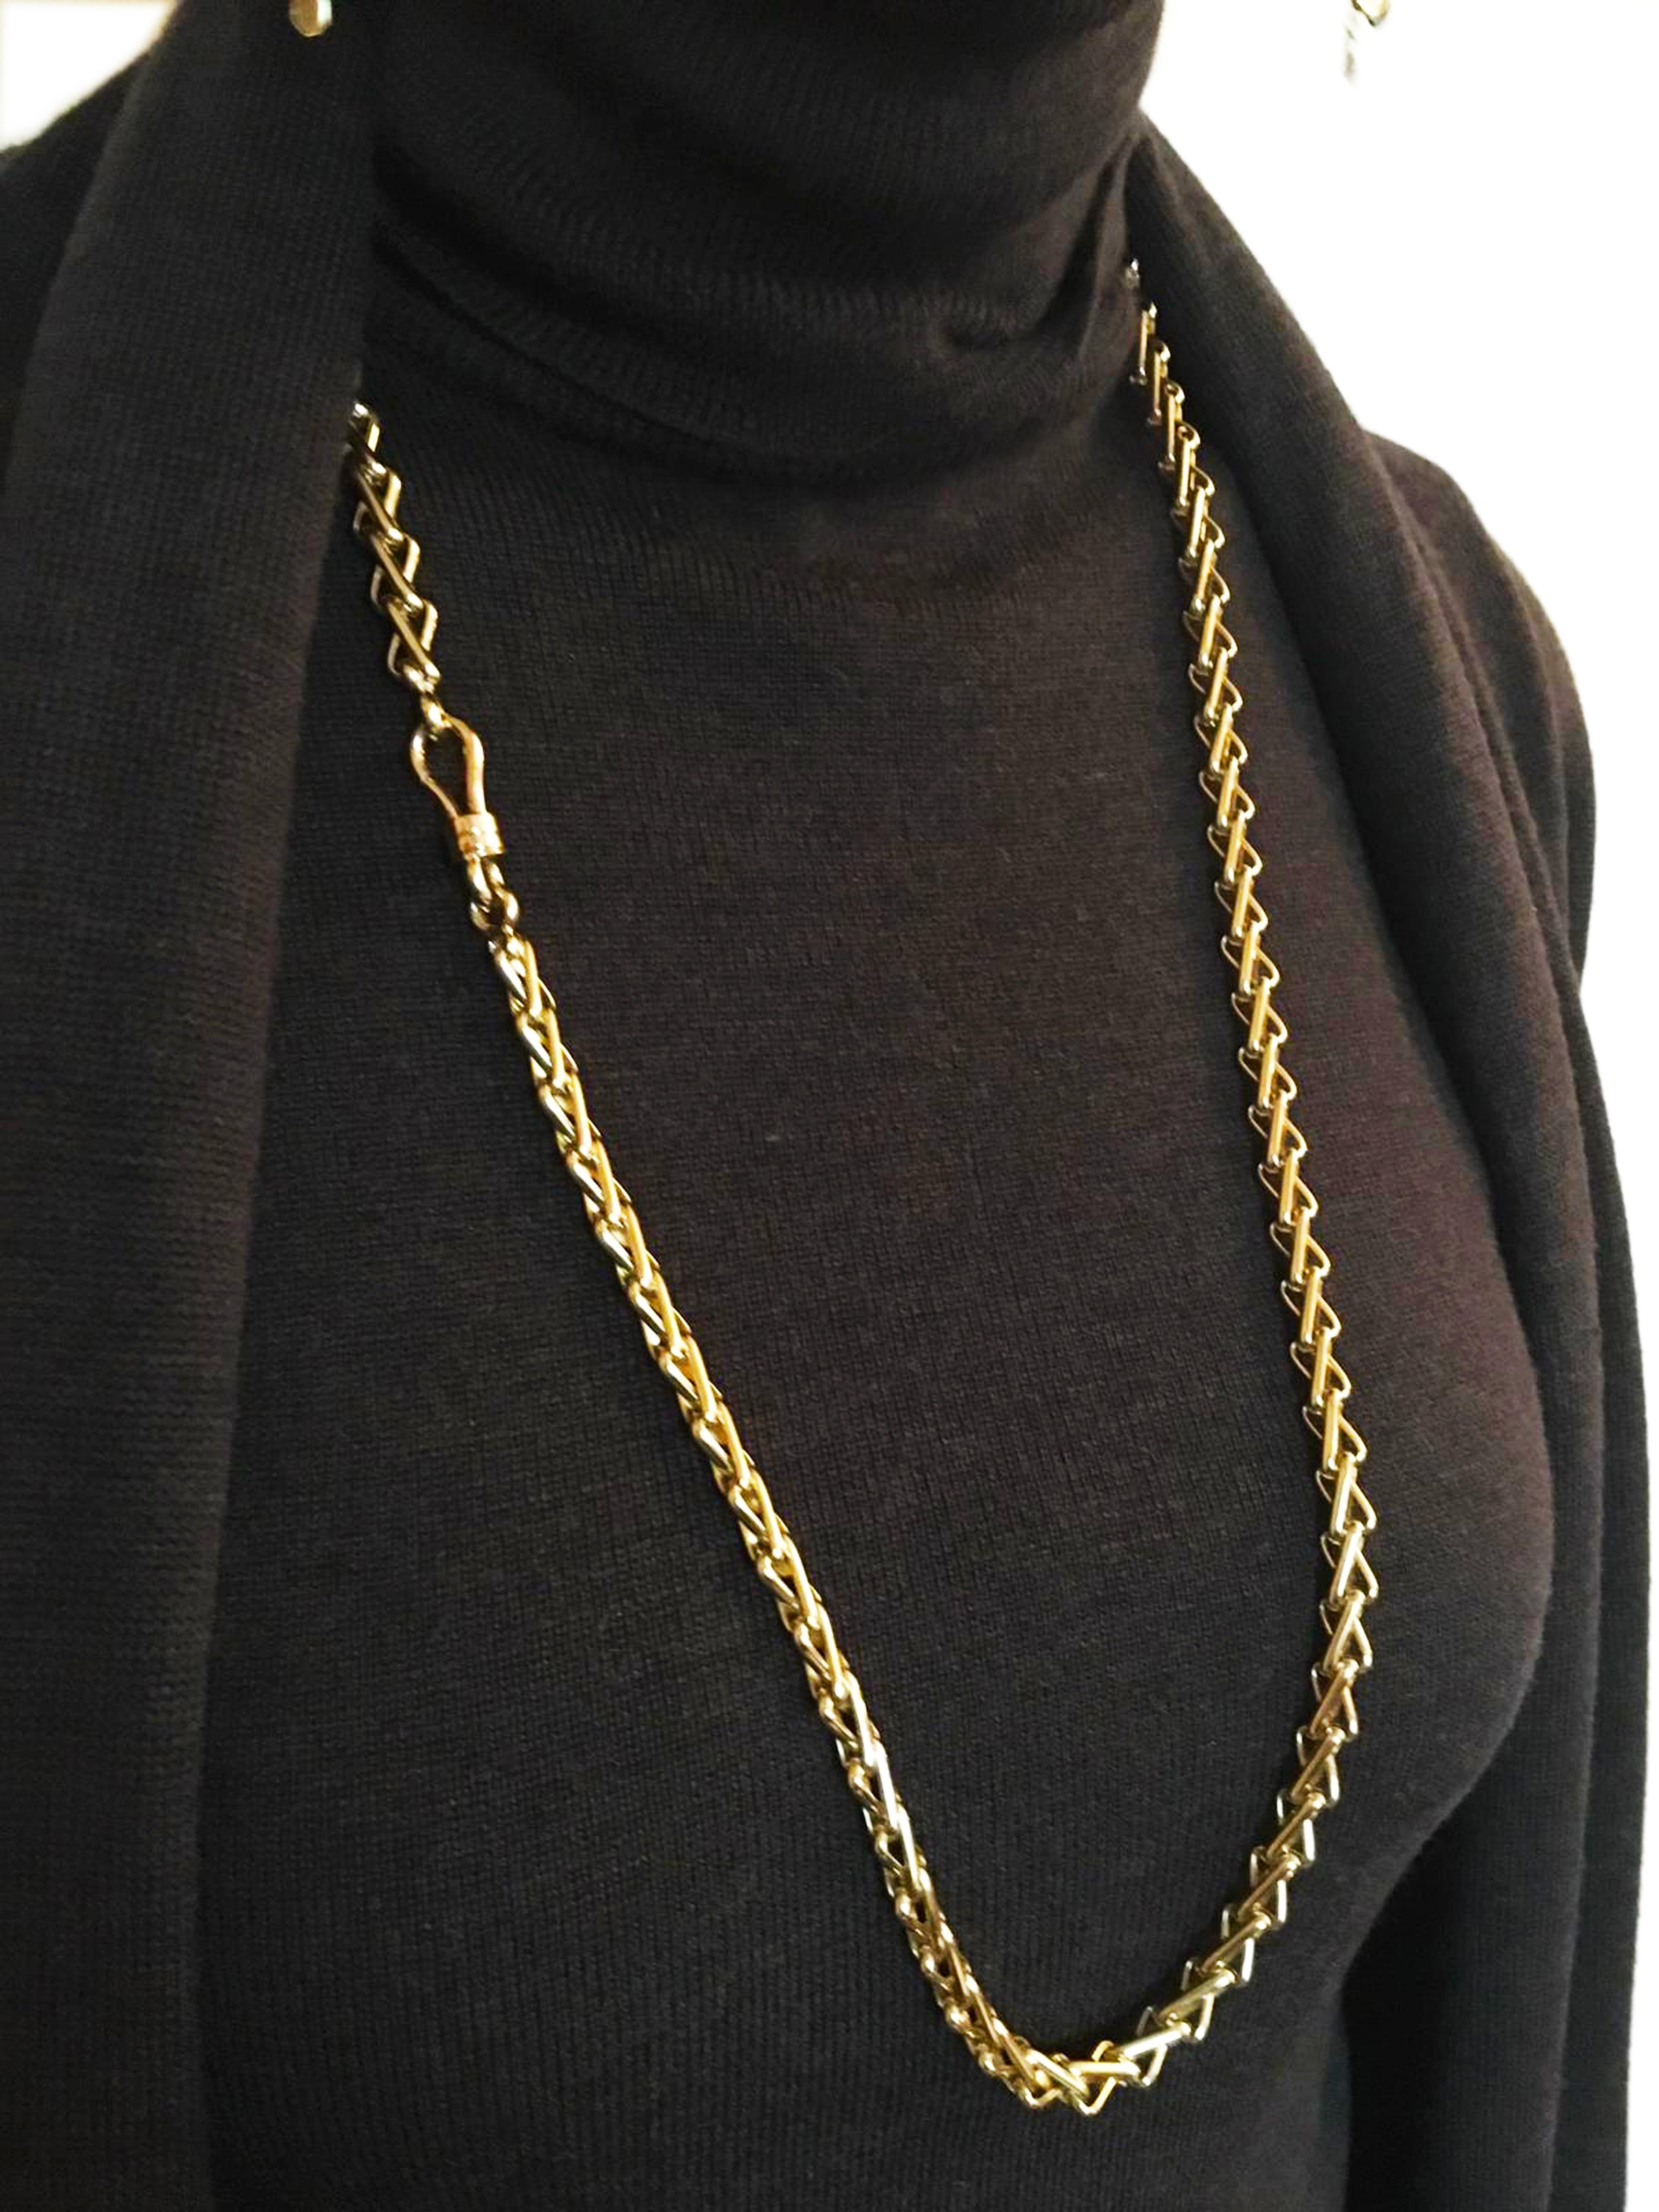 Original 1980 One-of-a-Kind Pomellato 18K Solid Yellow Gold Long Chain Necklace 6